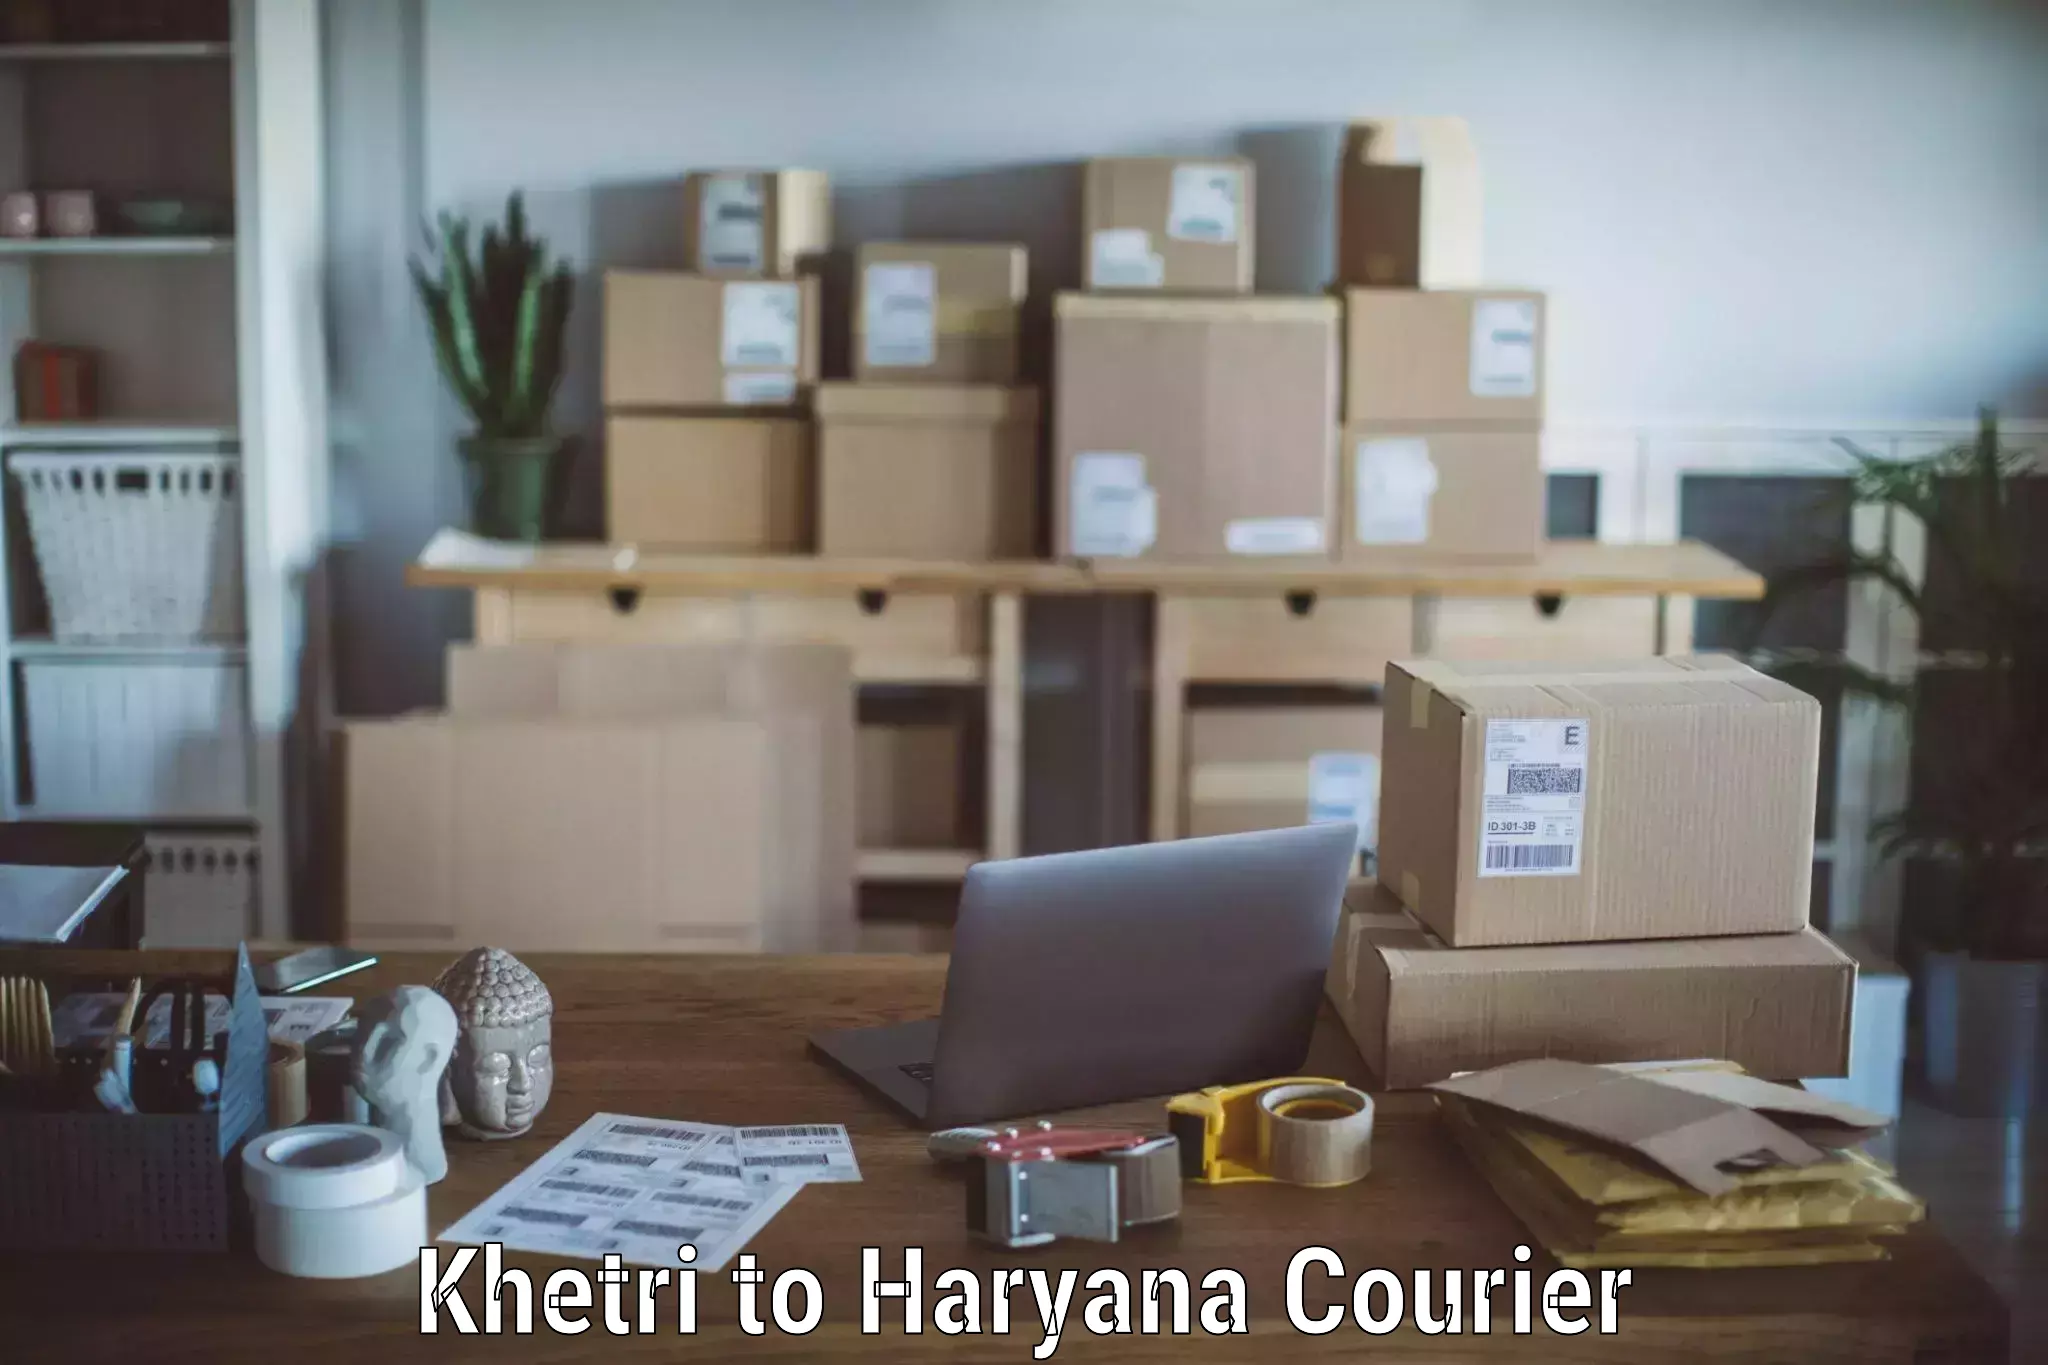 Nationwide moving services Khetri to Gurgaon